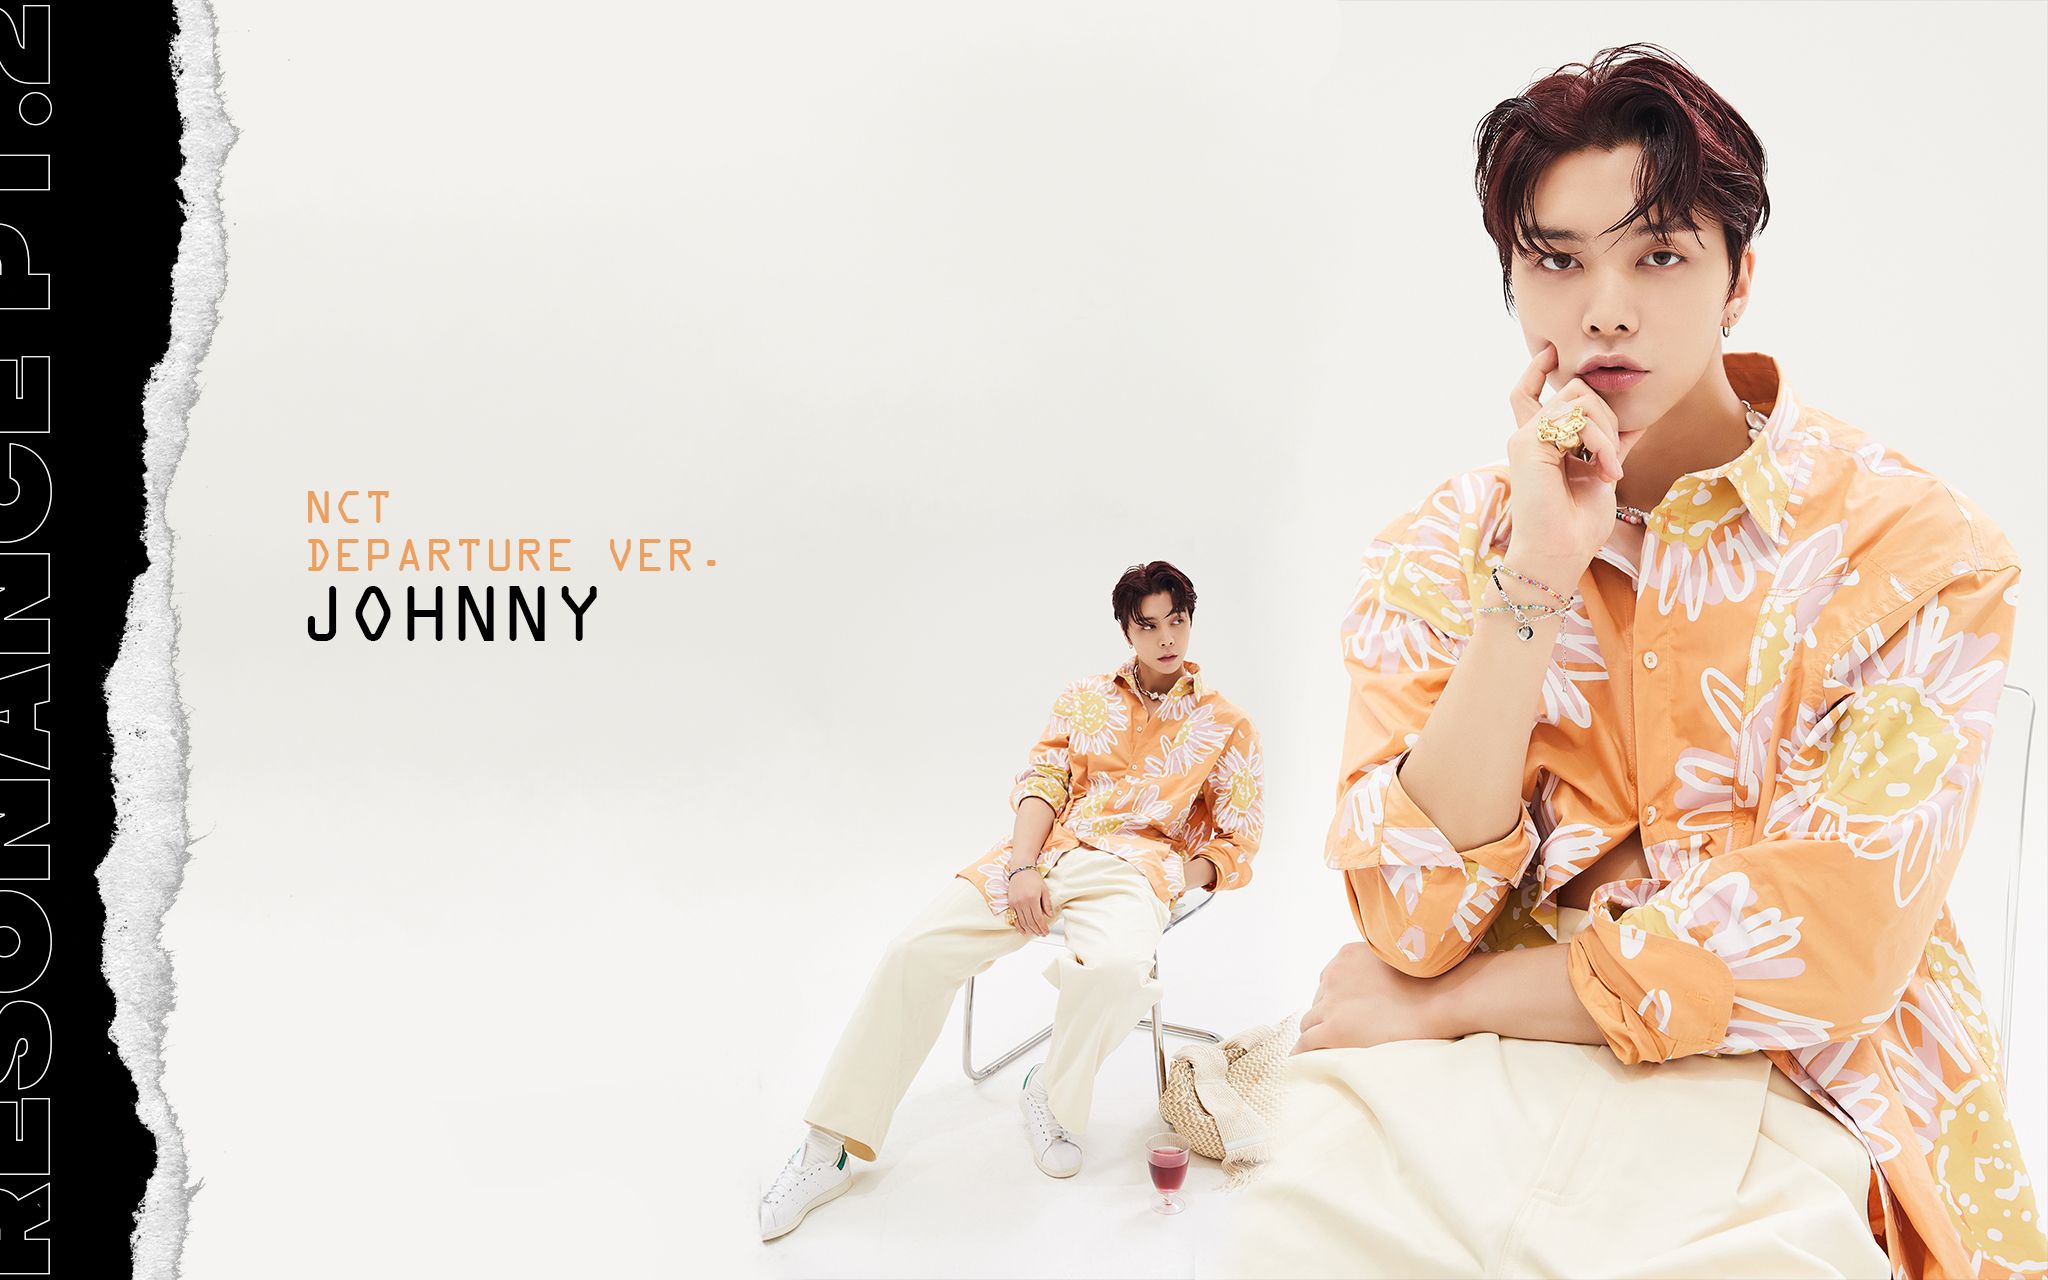 Johnny is sitting on a chair with his legs crossed and looking at the camera. He is wearing a yellow shirt and white pants. - NCT